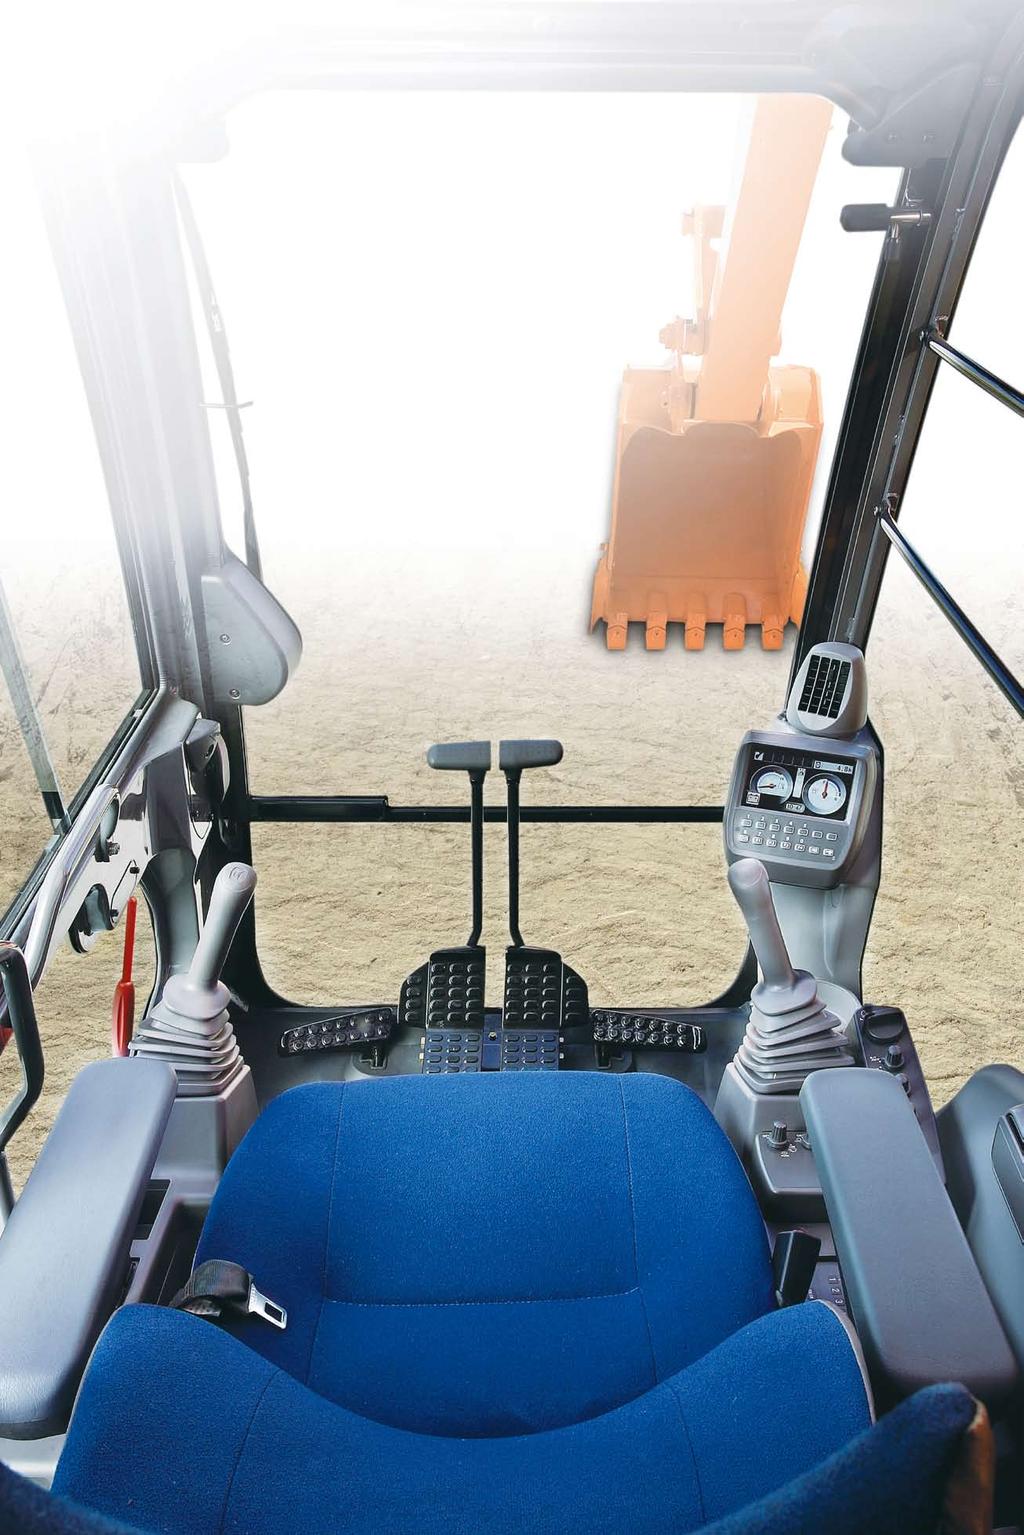 Three switches on the lever (optional) can be set to operate attachments other than buckets.